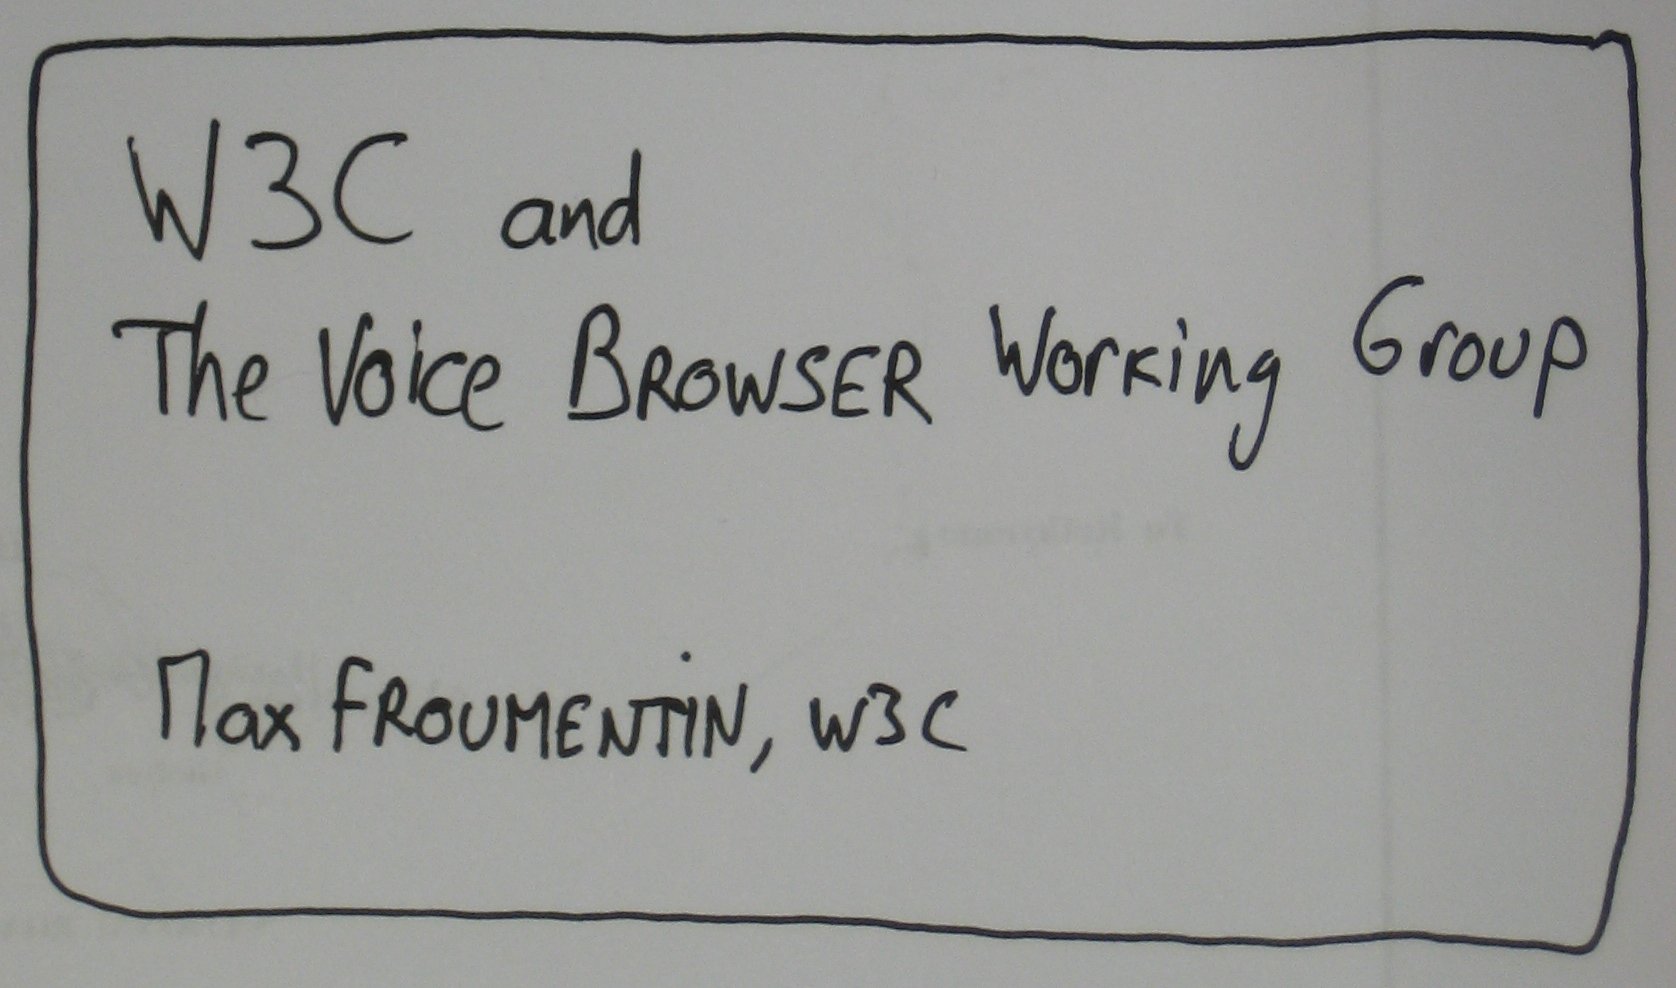 W3C and the Voice Browser Working Group